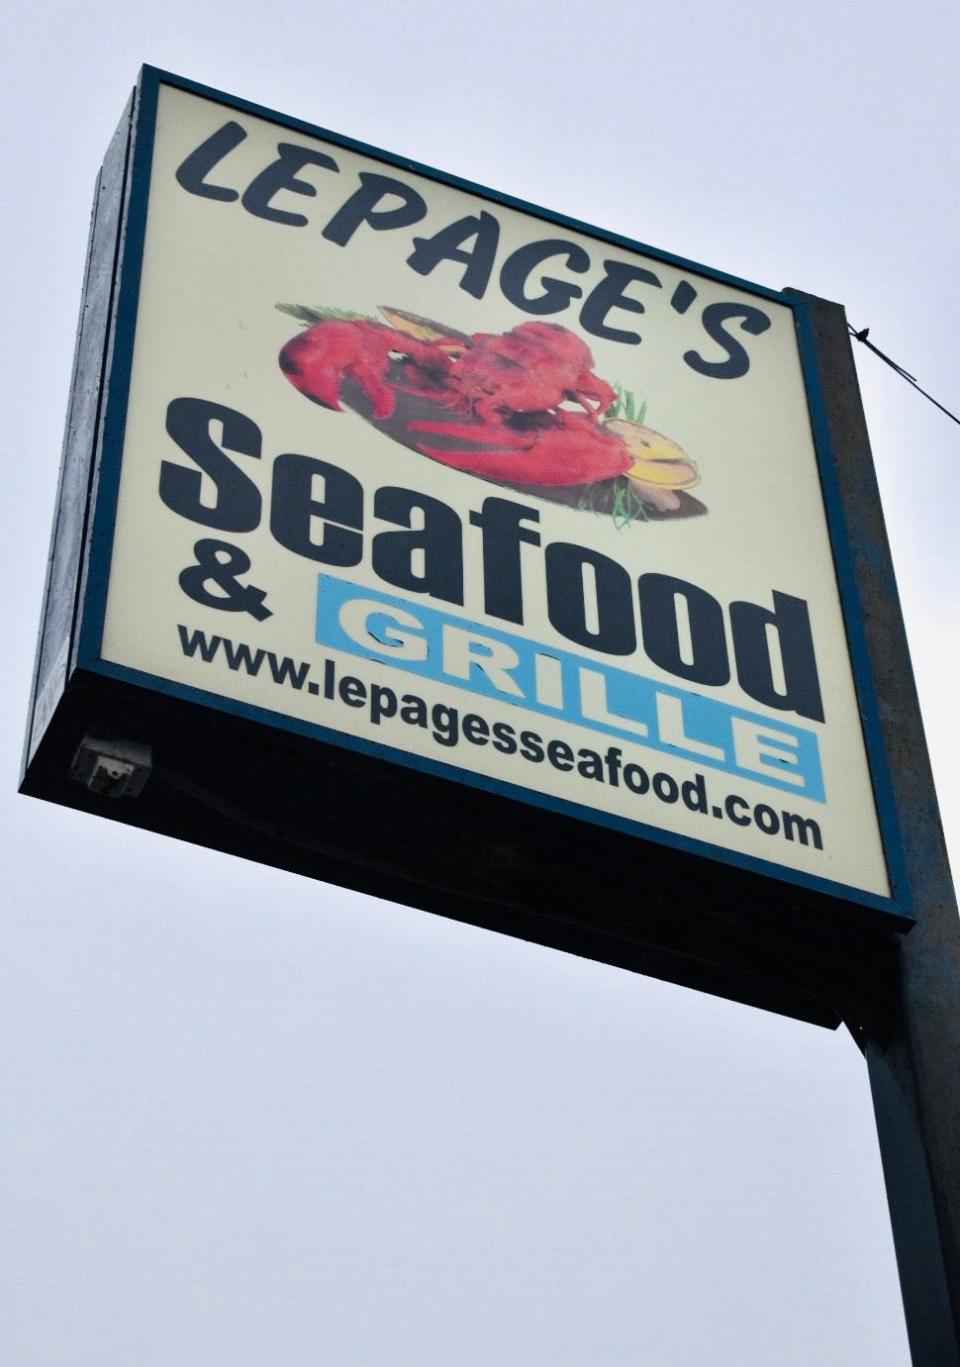 LePage's Seafood and Grille, at 439 Martine St. in Fall River, announced in a now-deleted Facebook post that it has closed indefinitely.